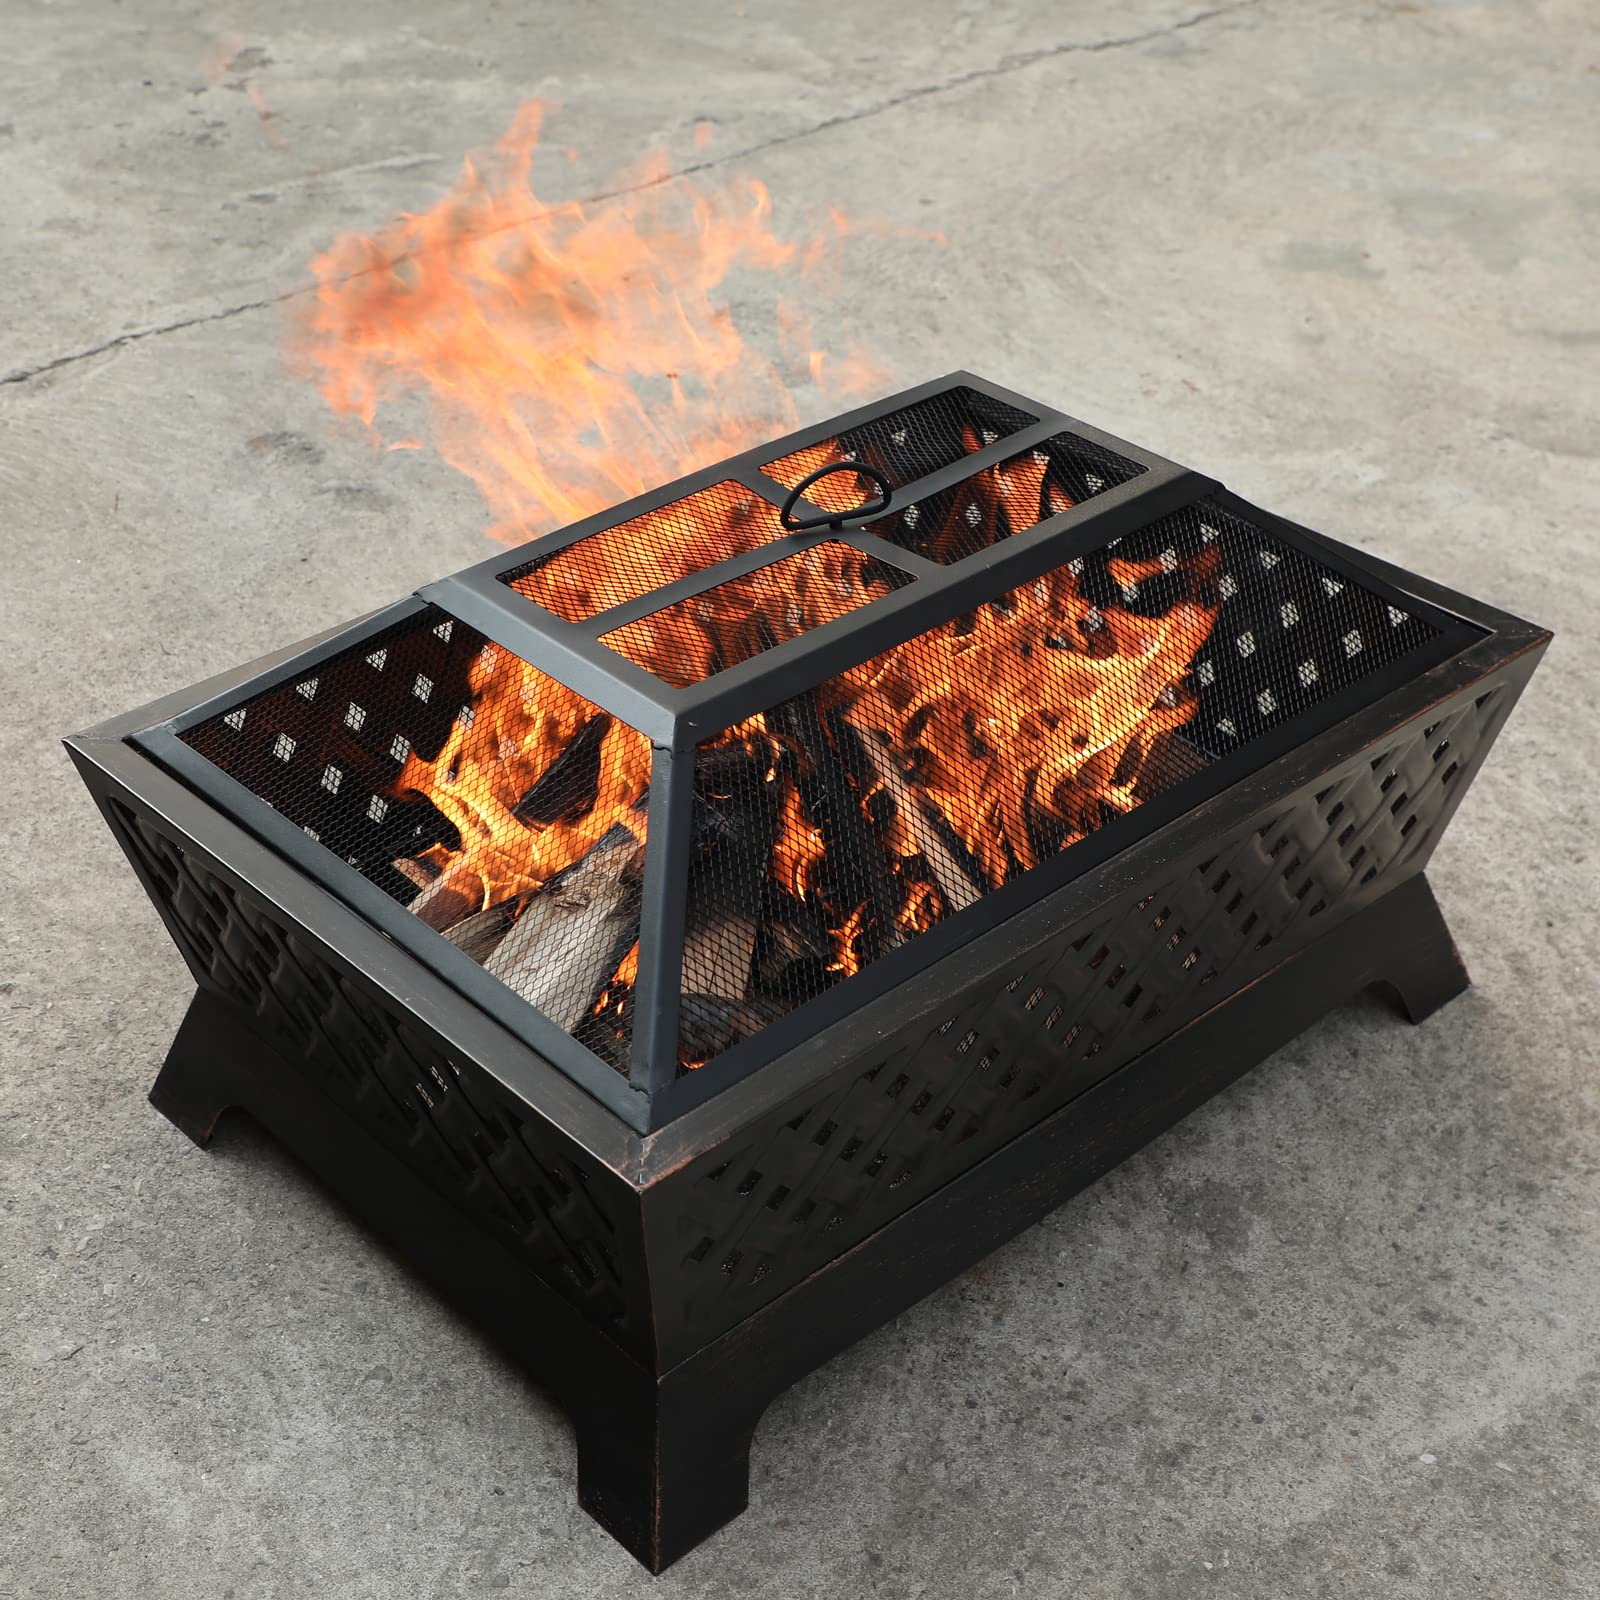 PHI VILLA Outdoor Wood Burning Fire Pits, Rectangular Deep Bowl Large Patio Firepit with Spark Screen, Poker & Metal Grate, 34" x 26"